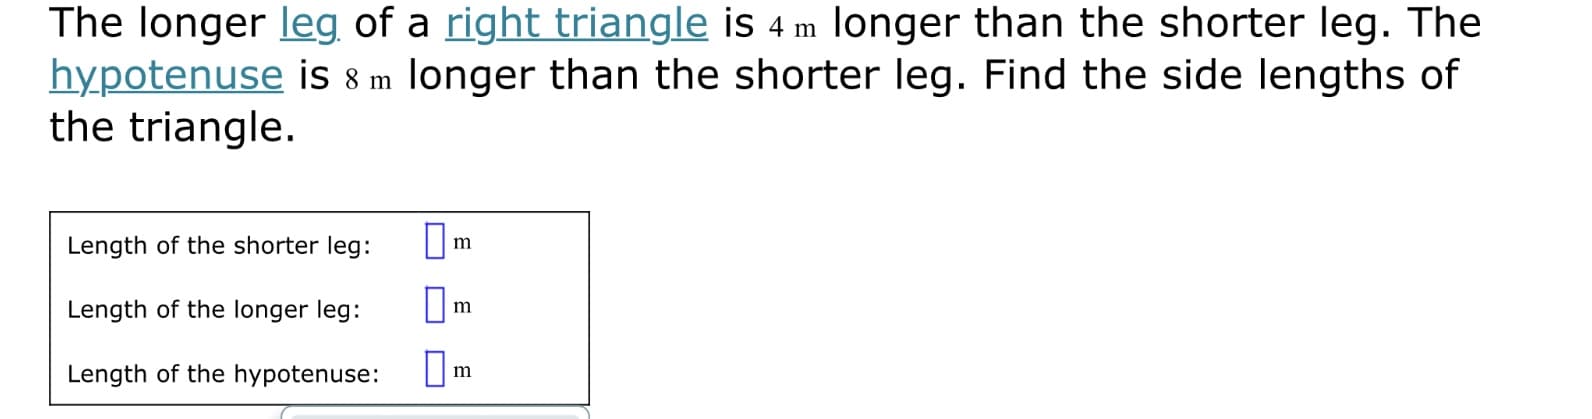 The longer leg of a right triangle is 4 m longer than the shorter leg. The
hypotenuse is 8 m longer than the shorter leg. Find the side lengths of
the triangle.
Length of the shorter leg:
m
Length of the longer leg:
m
Length of the hypotenuse:
Om
